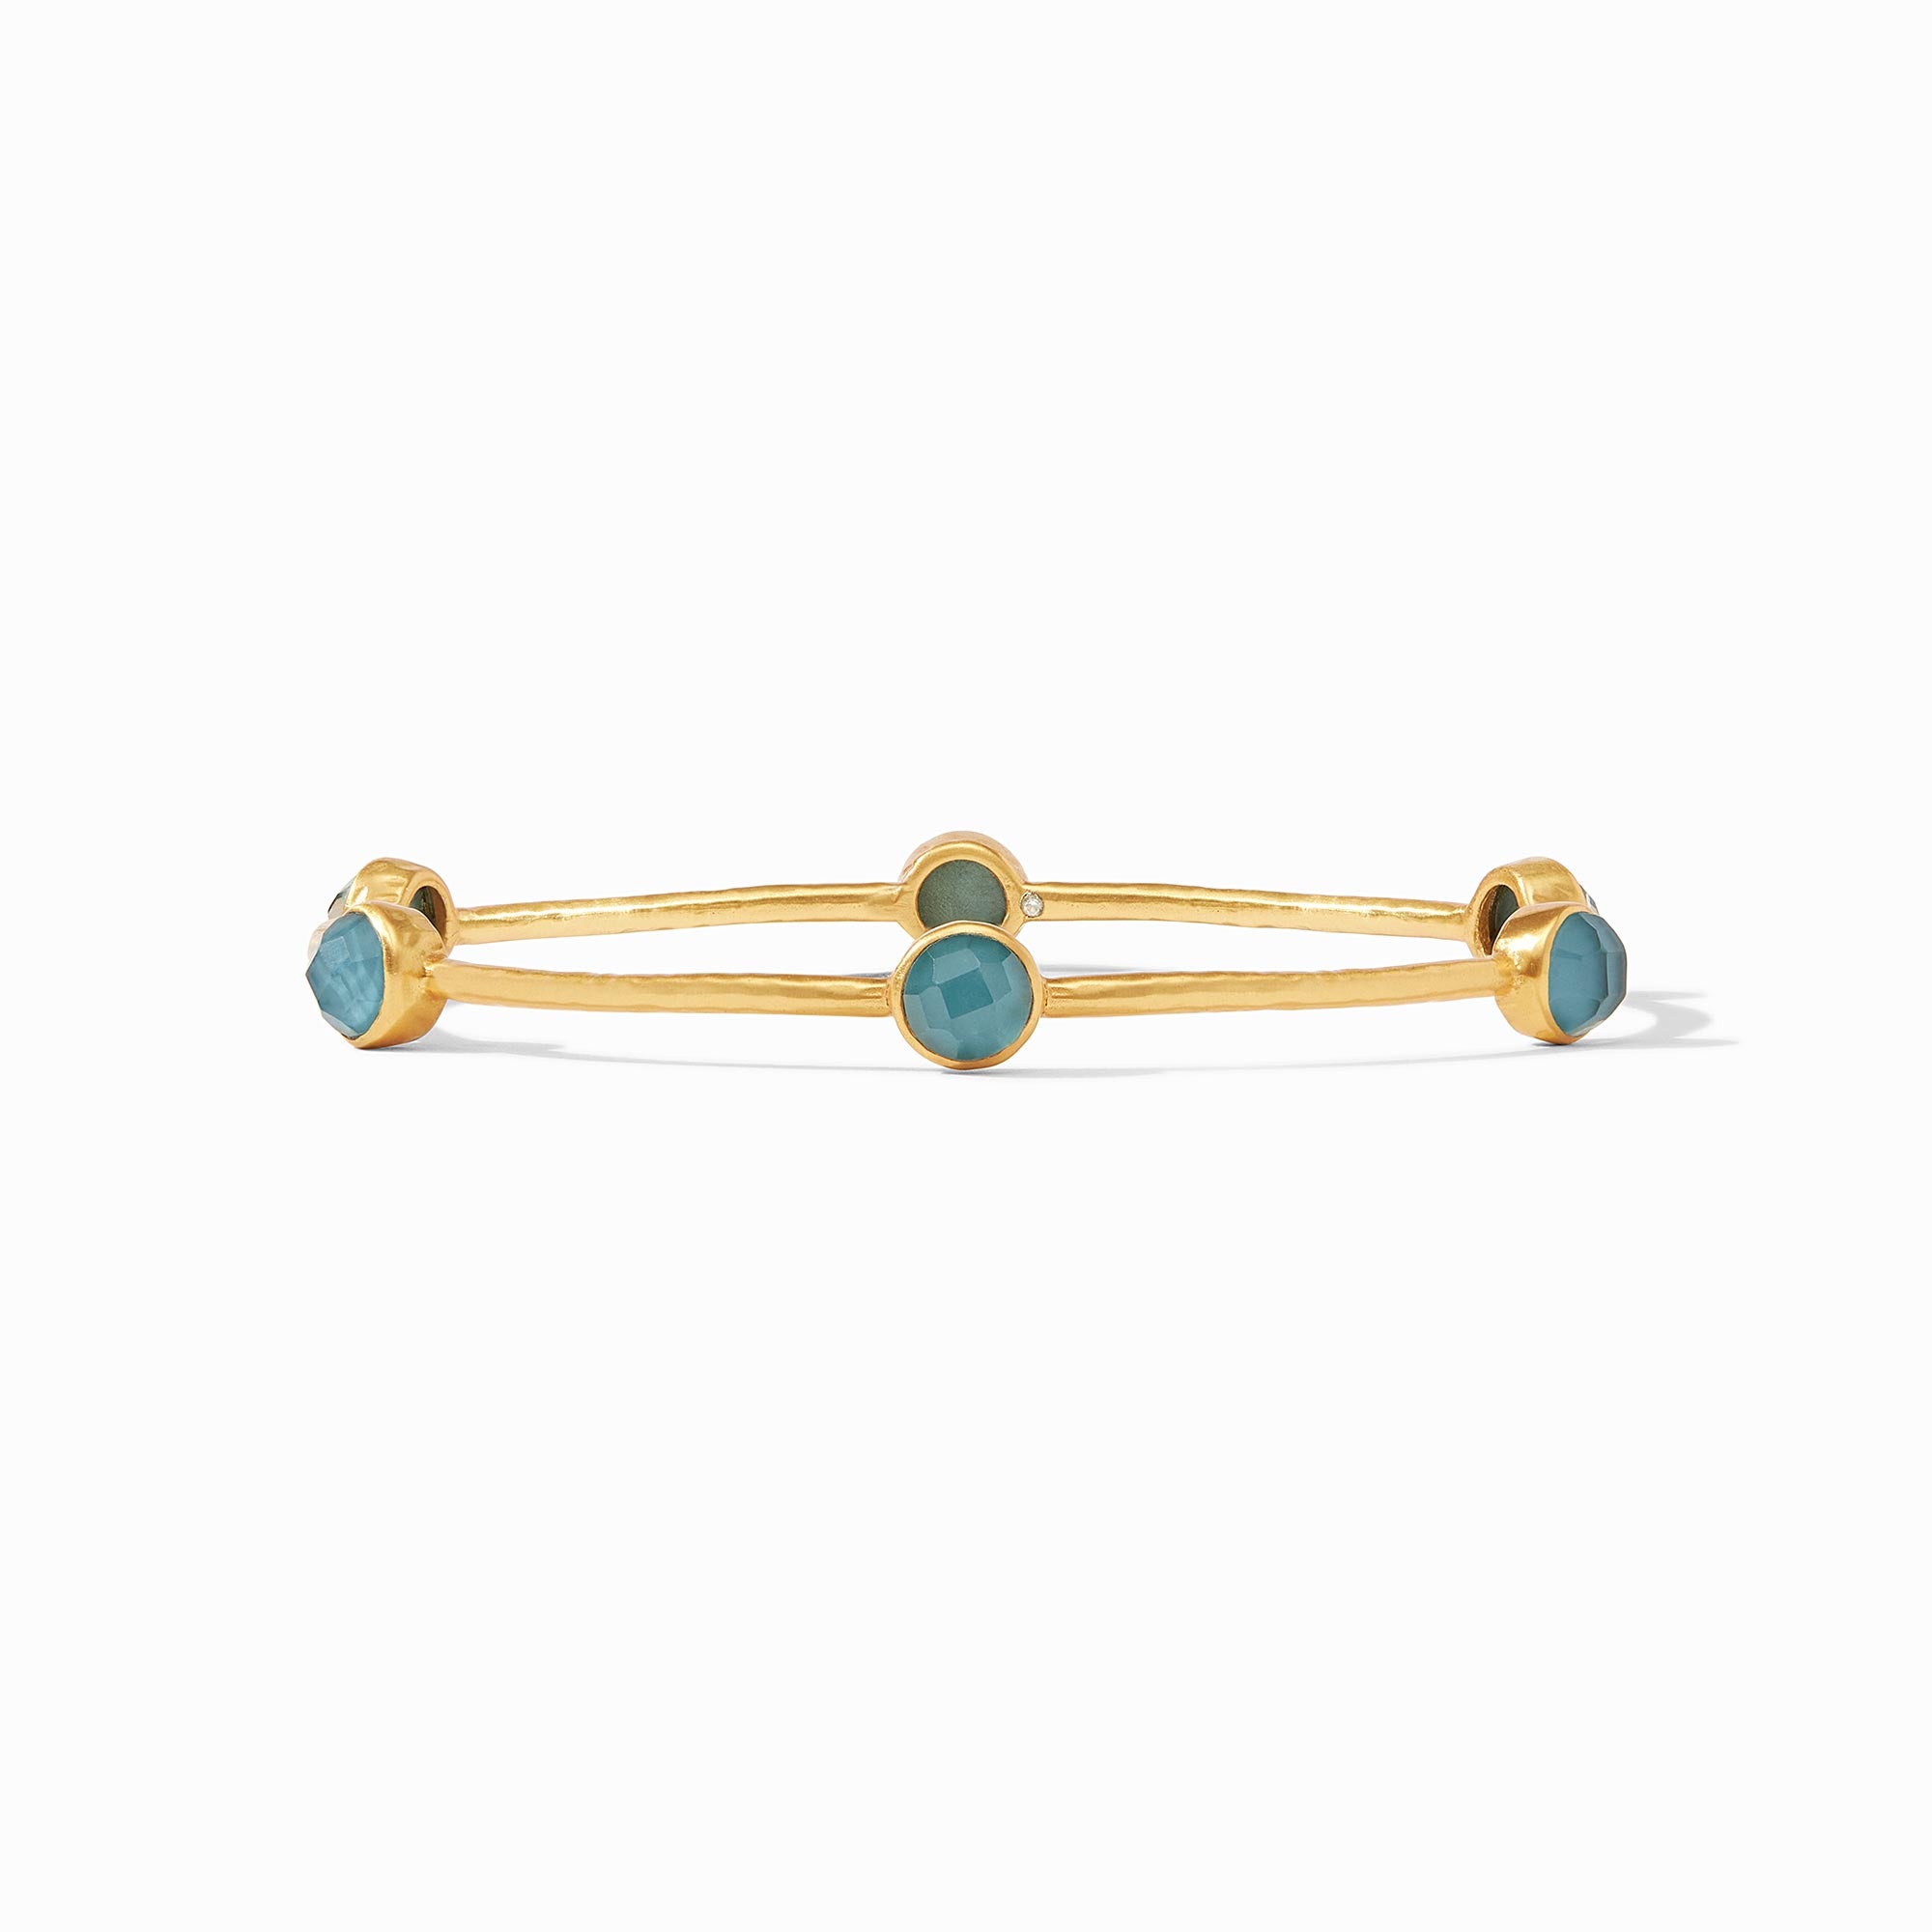 Julie Vos - Milano Luxe Bangle, Iridescent Peacock Blue / Large